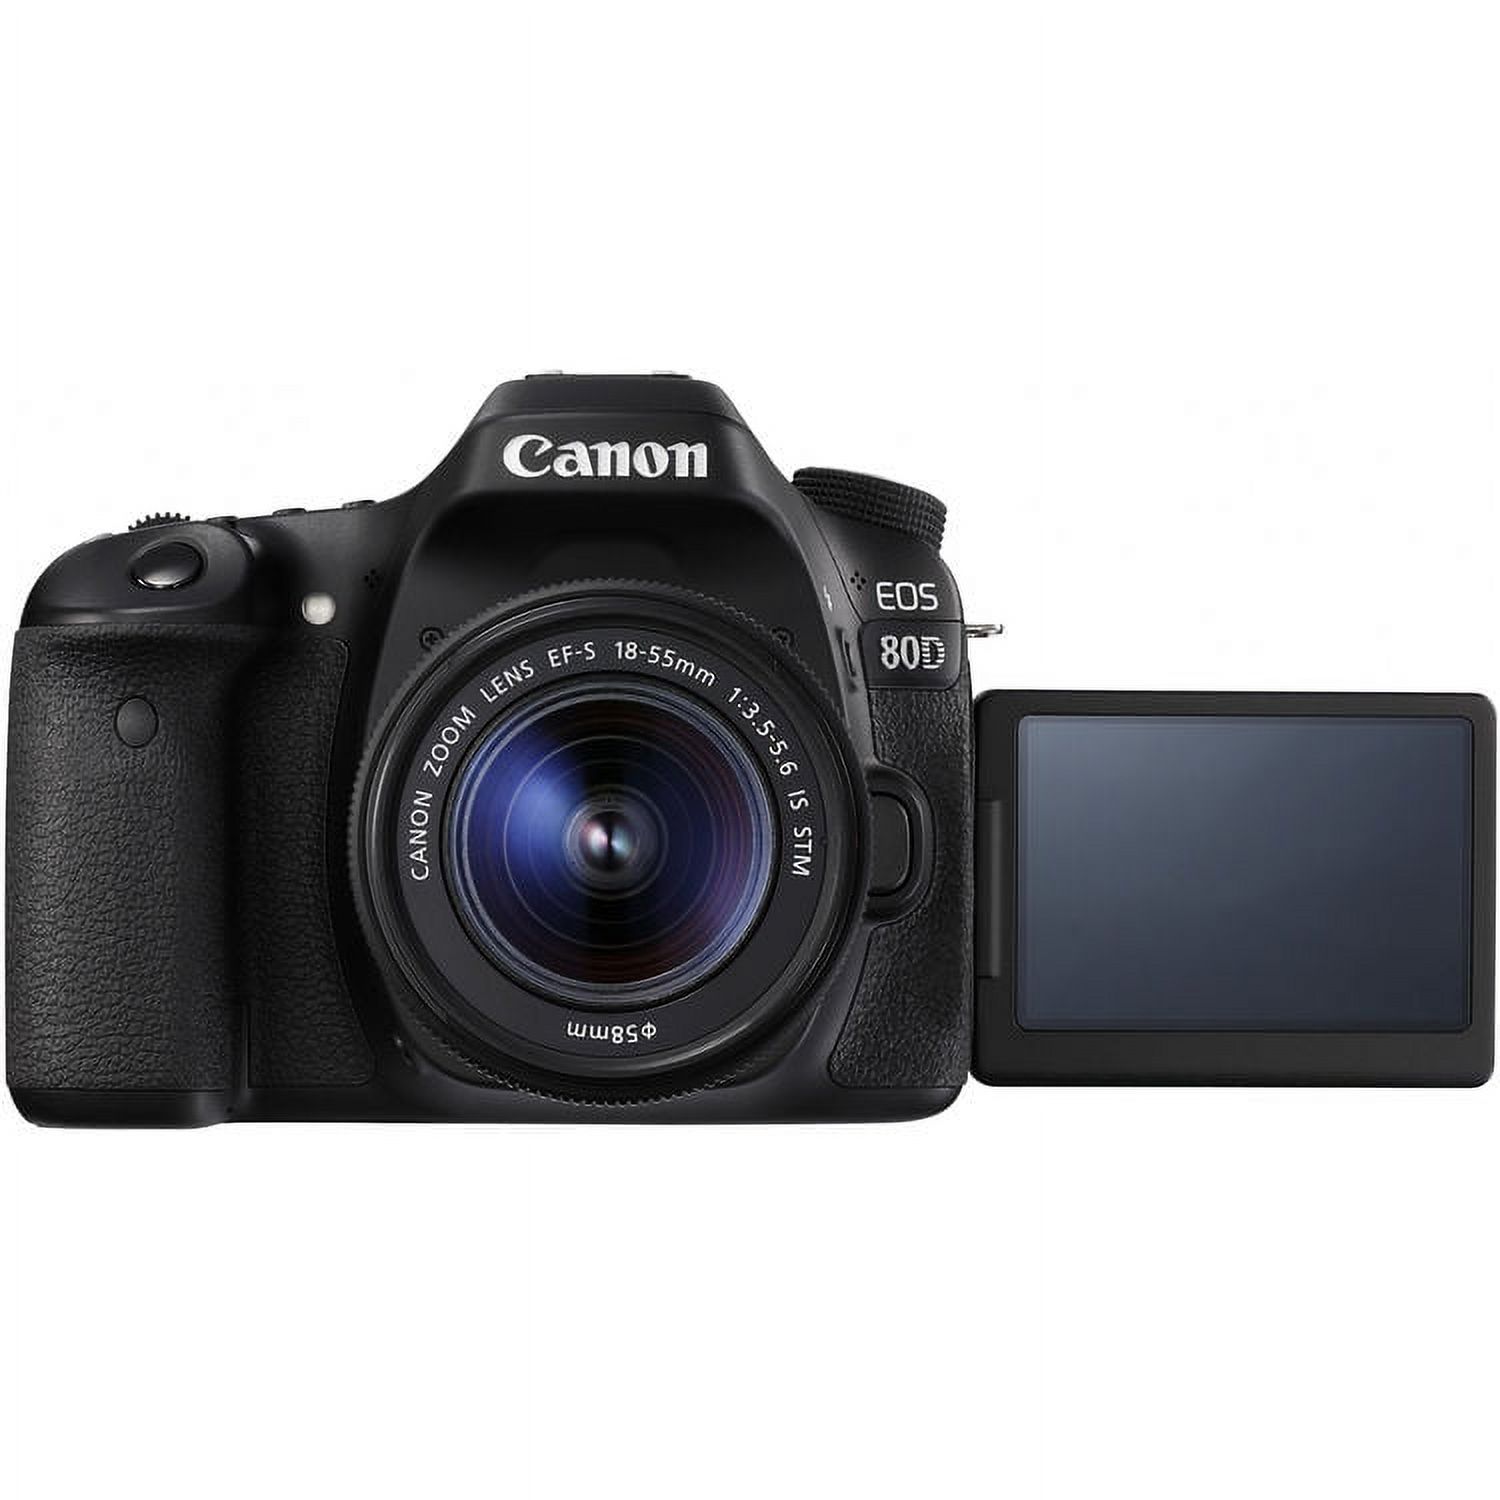 Canon EOS 80D DSLR Camera with 18-55mm Lens - image 5 of 10